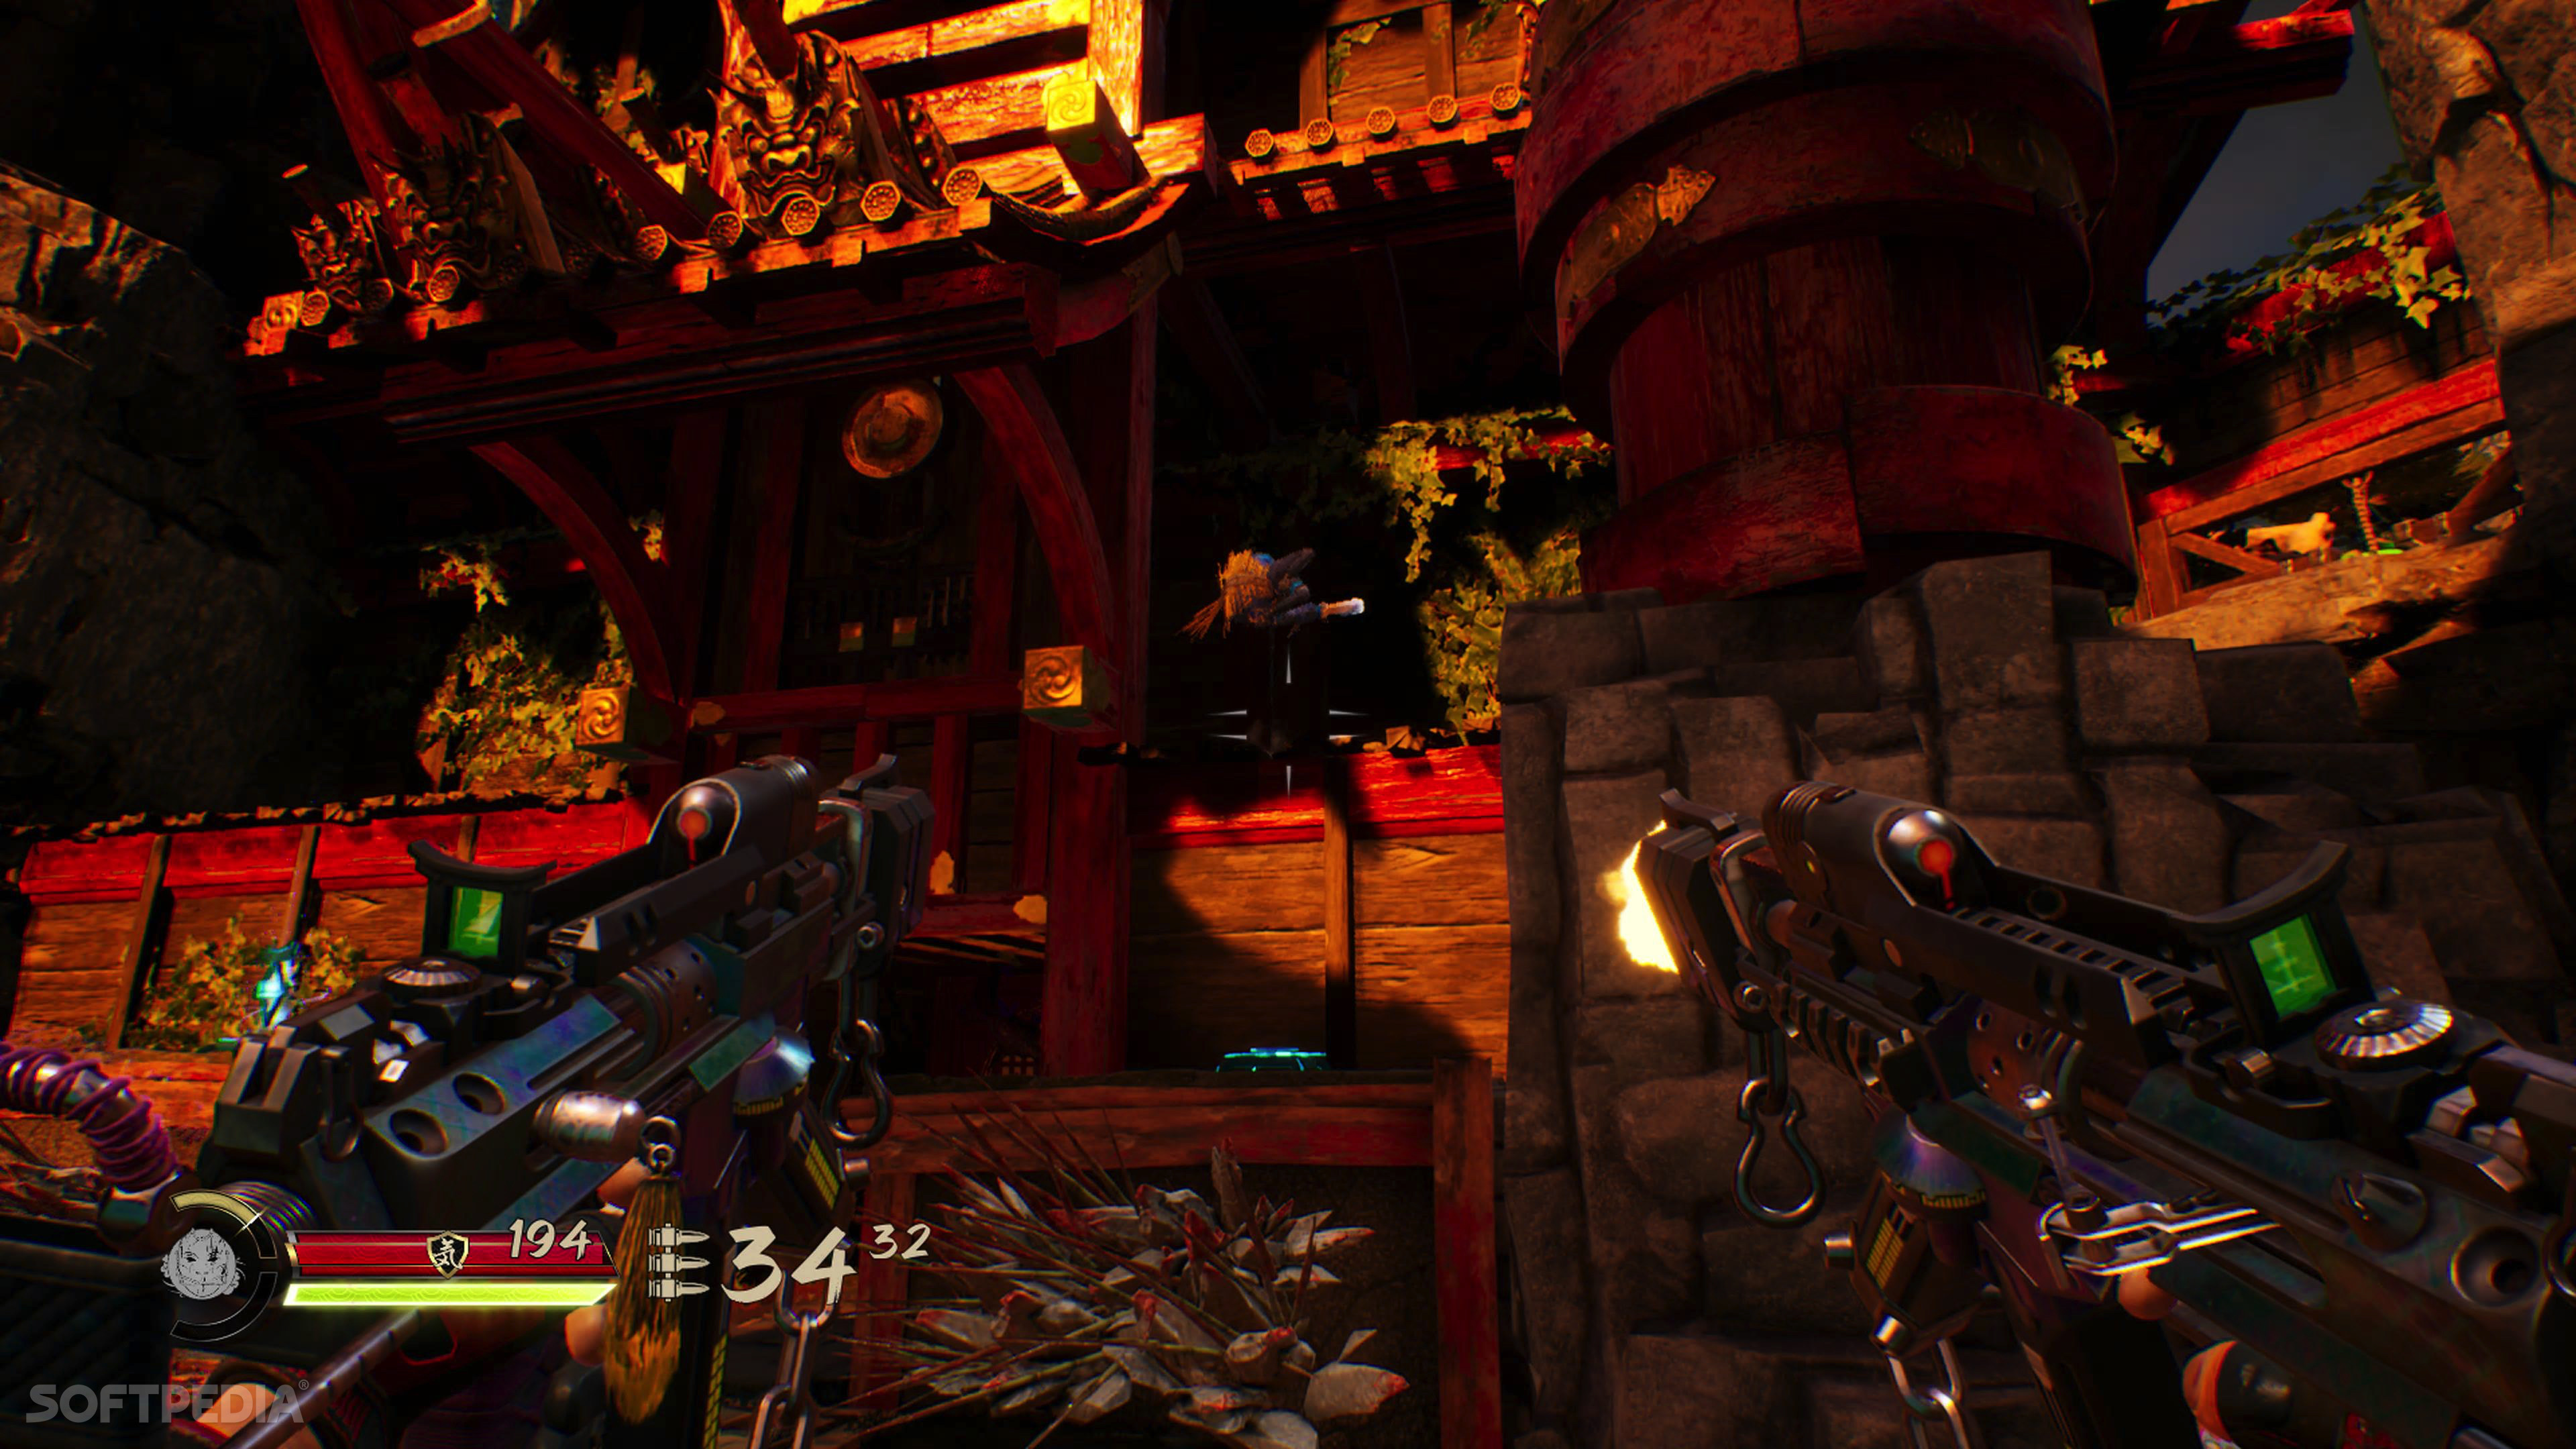 Shadow Warrior 3: Definitive Edition Review